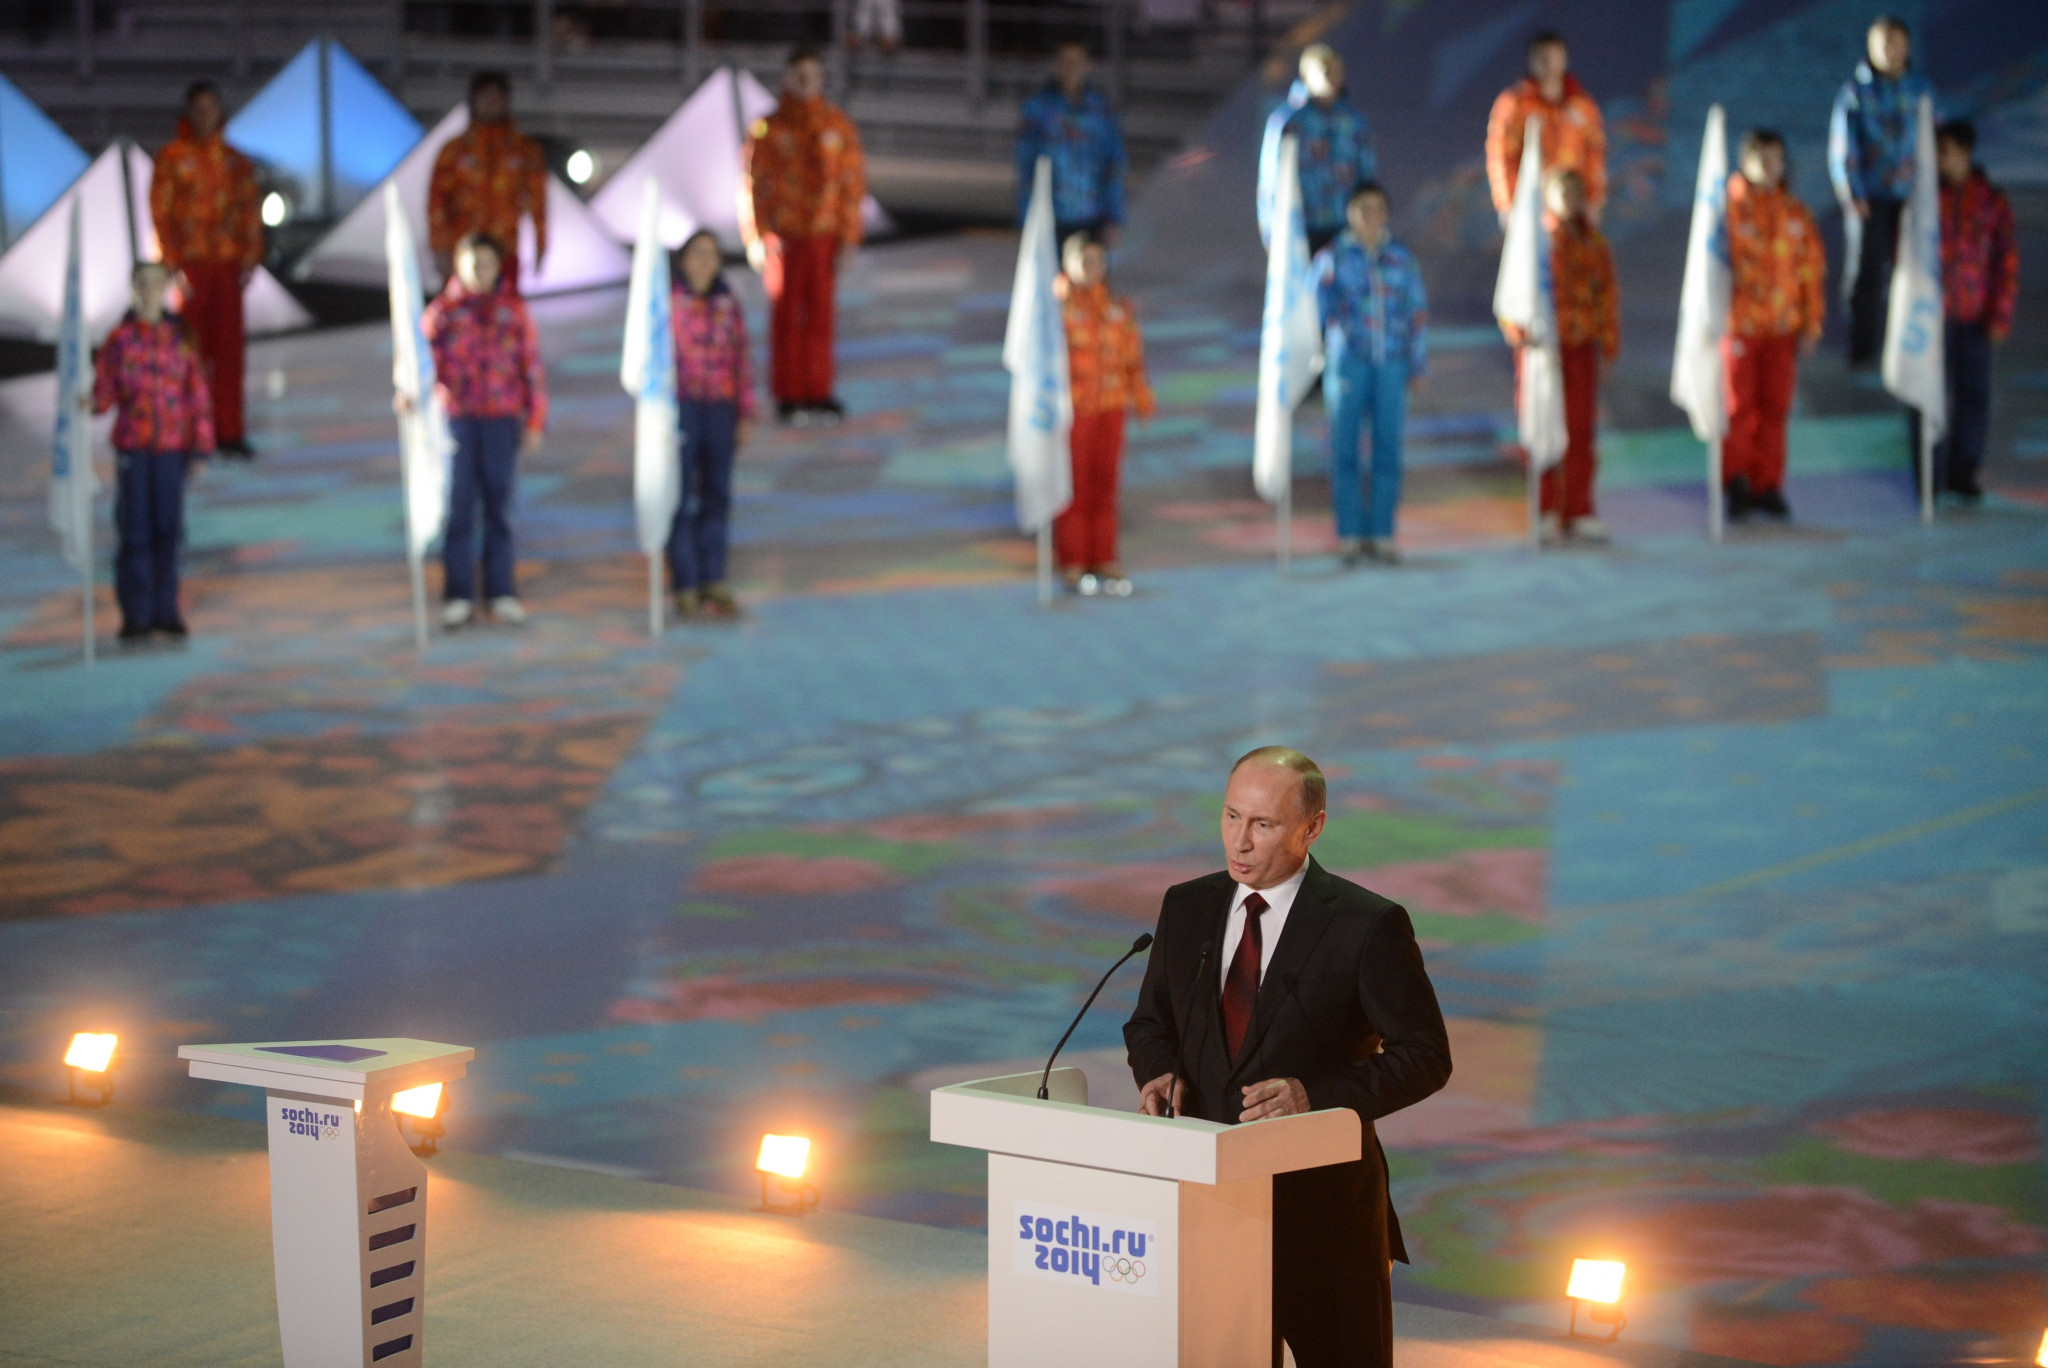 Russia's President Vladimir Putin speaks at a ceremony celebrating the one year countdown to the Sochi 2014 Winter Olympics opening at the Bolshoi Ice Dome rink in February 2013 ©Getty Images